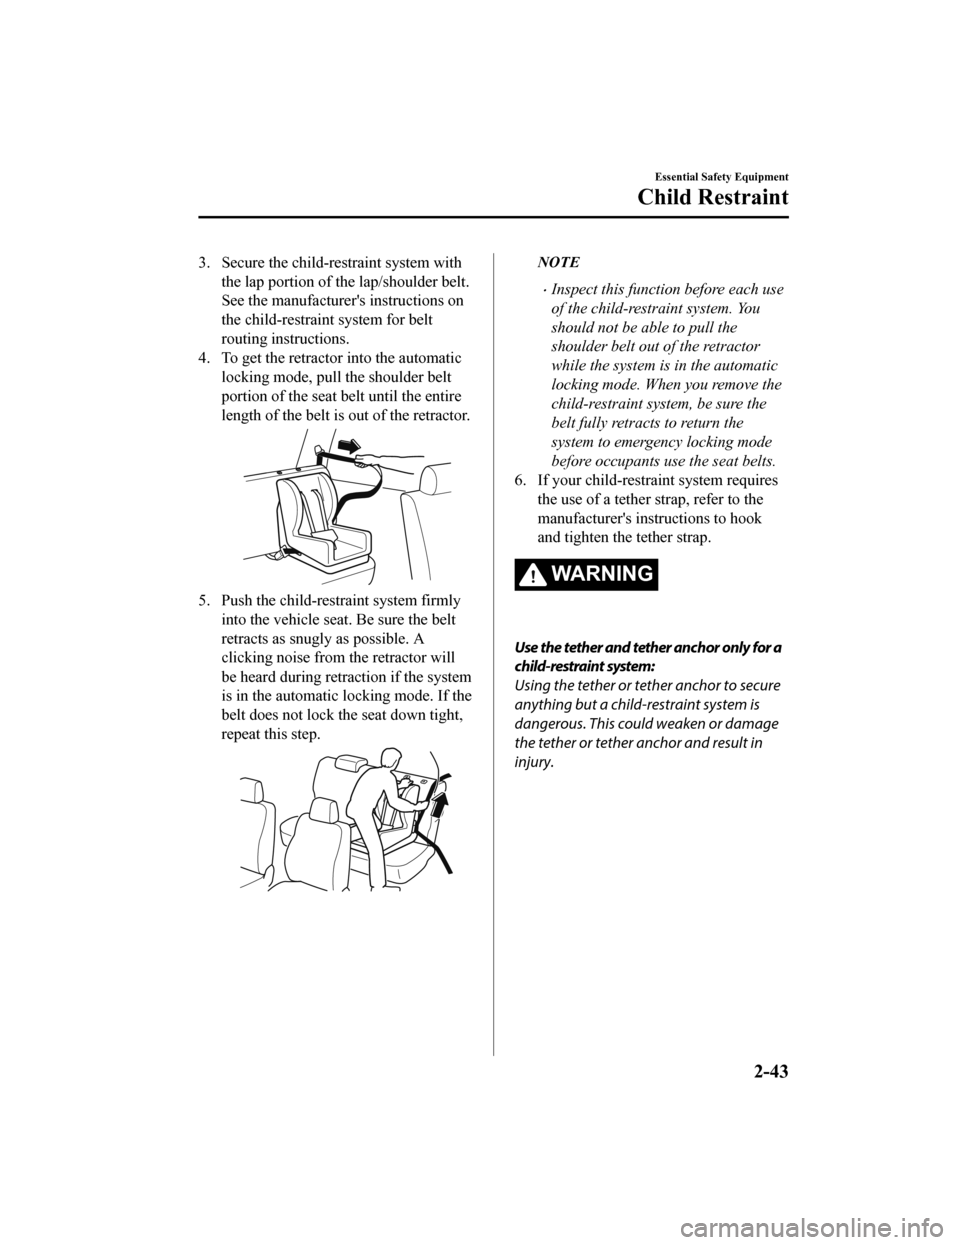 MAZDA MODEL 6 2020  Owners Manual (in English) 3. Secure the child-restraint system withthe lap portion of the lap/shoulder belt.
See the manufacturers instructions on
the child-restraint system for belt
routing instructions.
4. To get the retrac